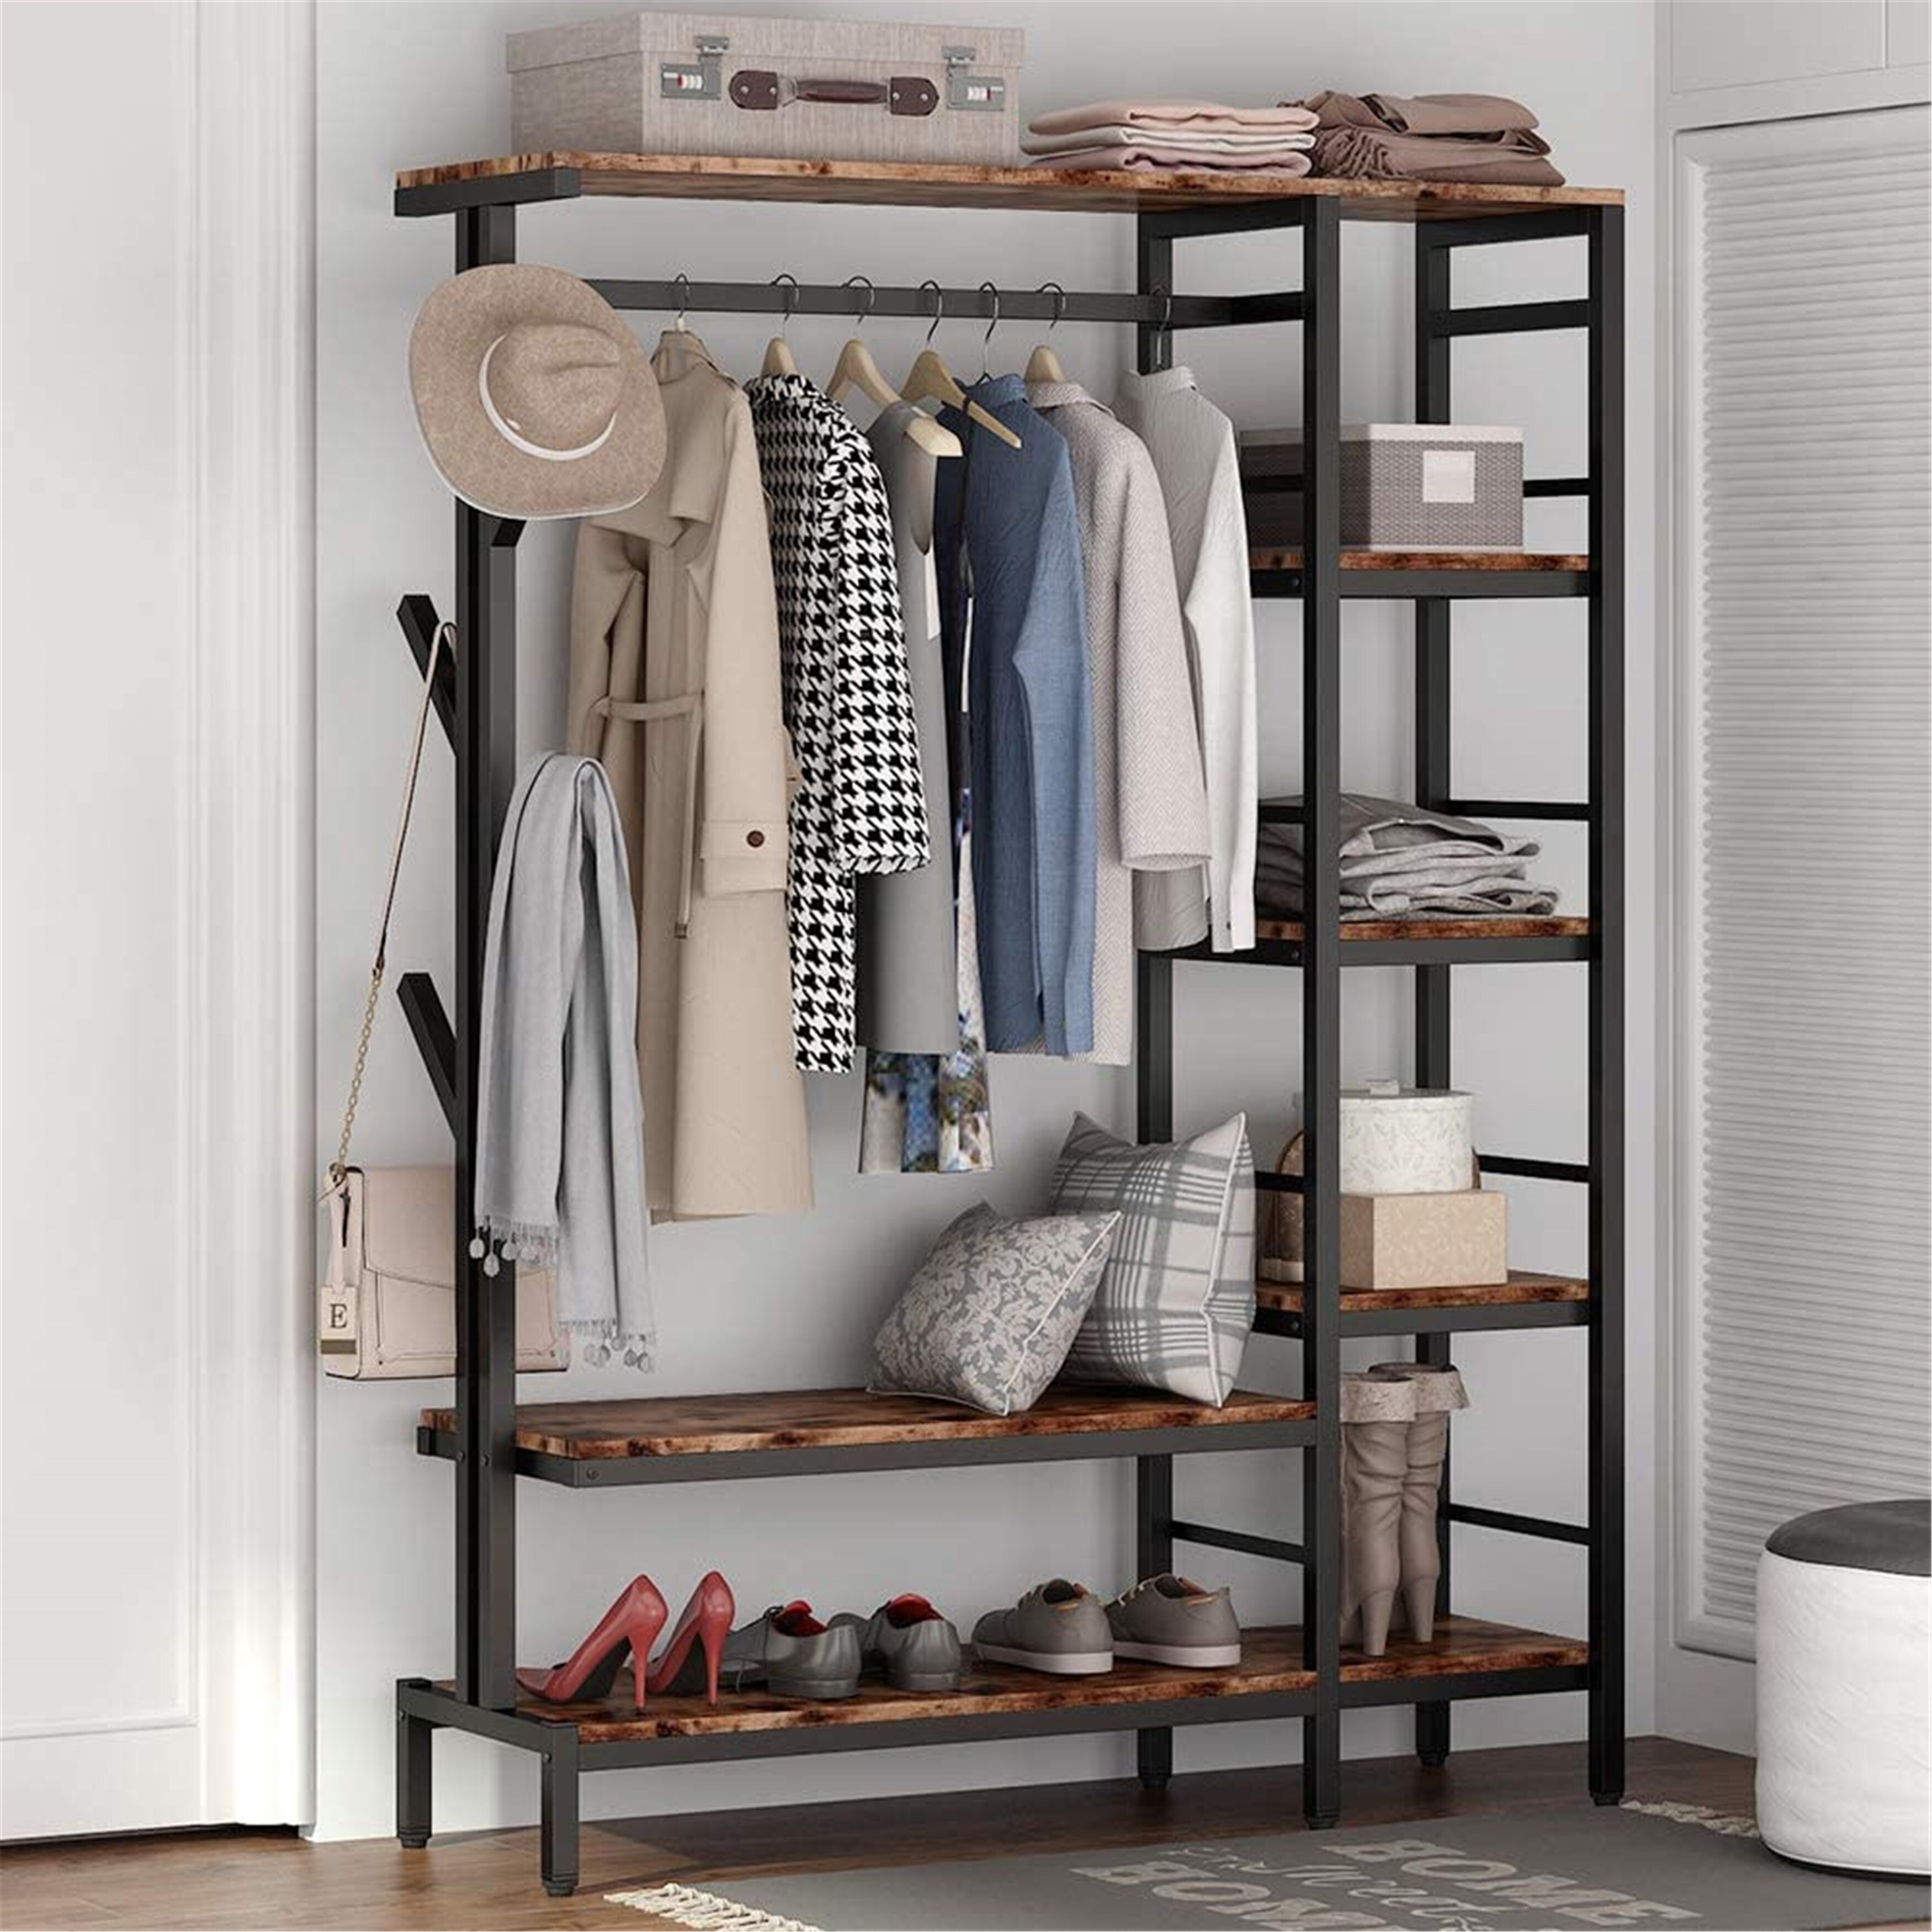 https://ak1.ostkcdn.com/images/products/is/images/direct/01c17bf5fde078b6618919016d52361b7de79103/Free-Standing-Closet-Organizer-with-Hooks-Garment-Rack-with-Shelves-and-Hanging-Rod.jpg